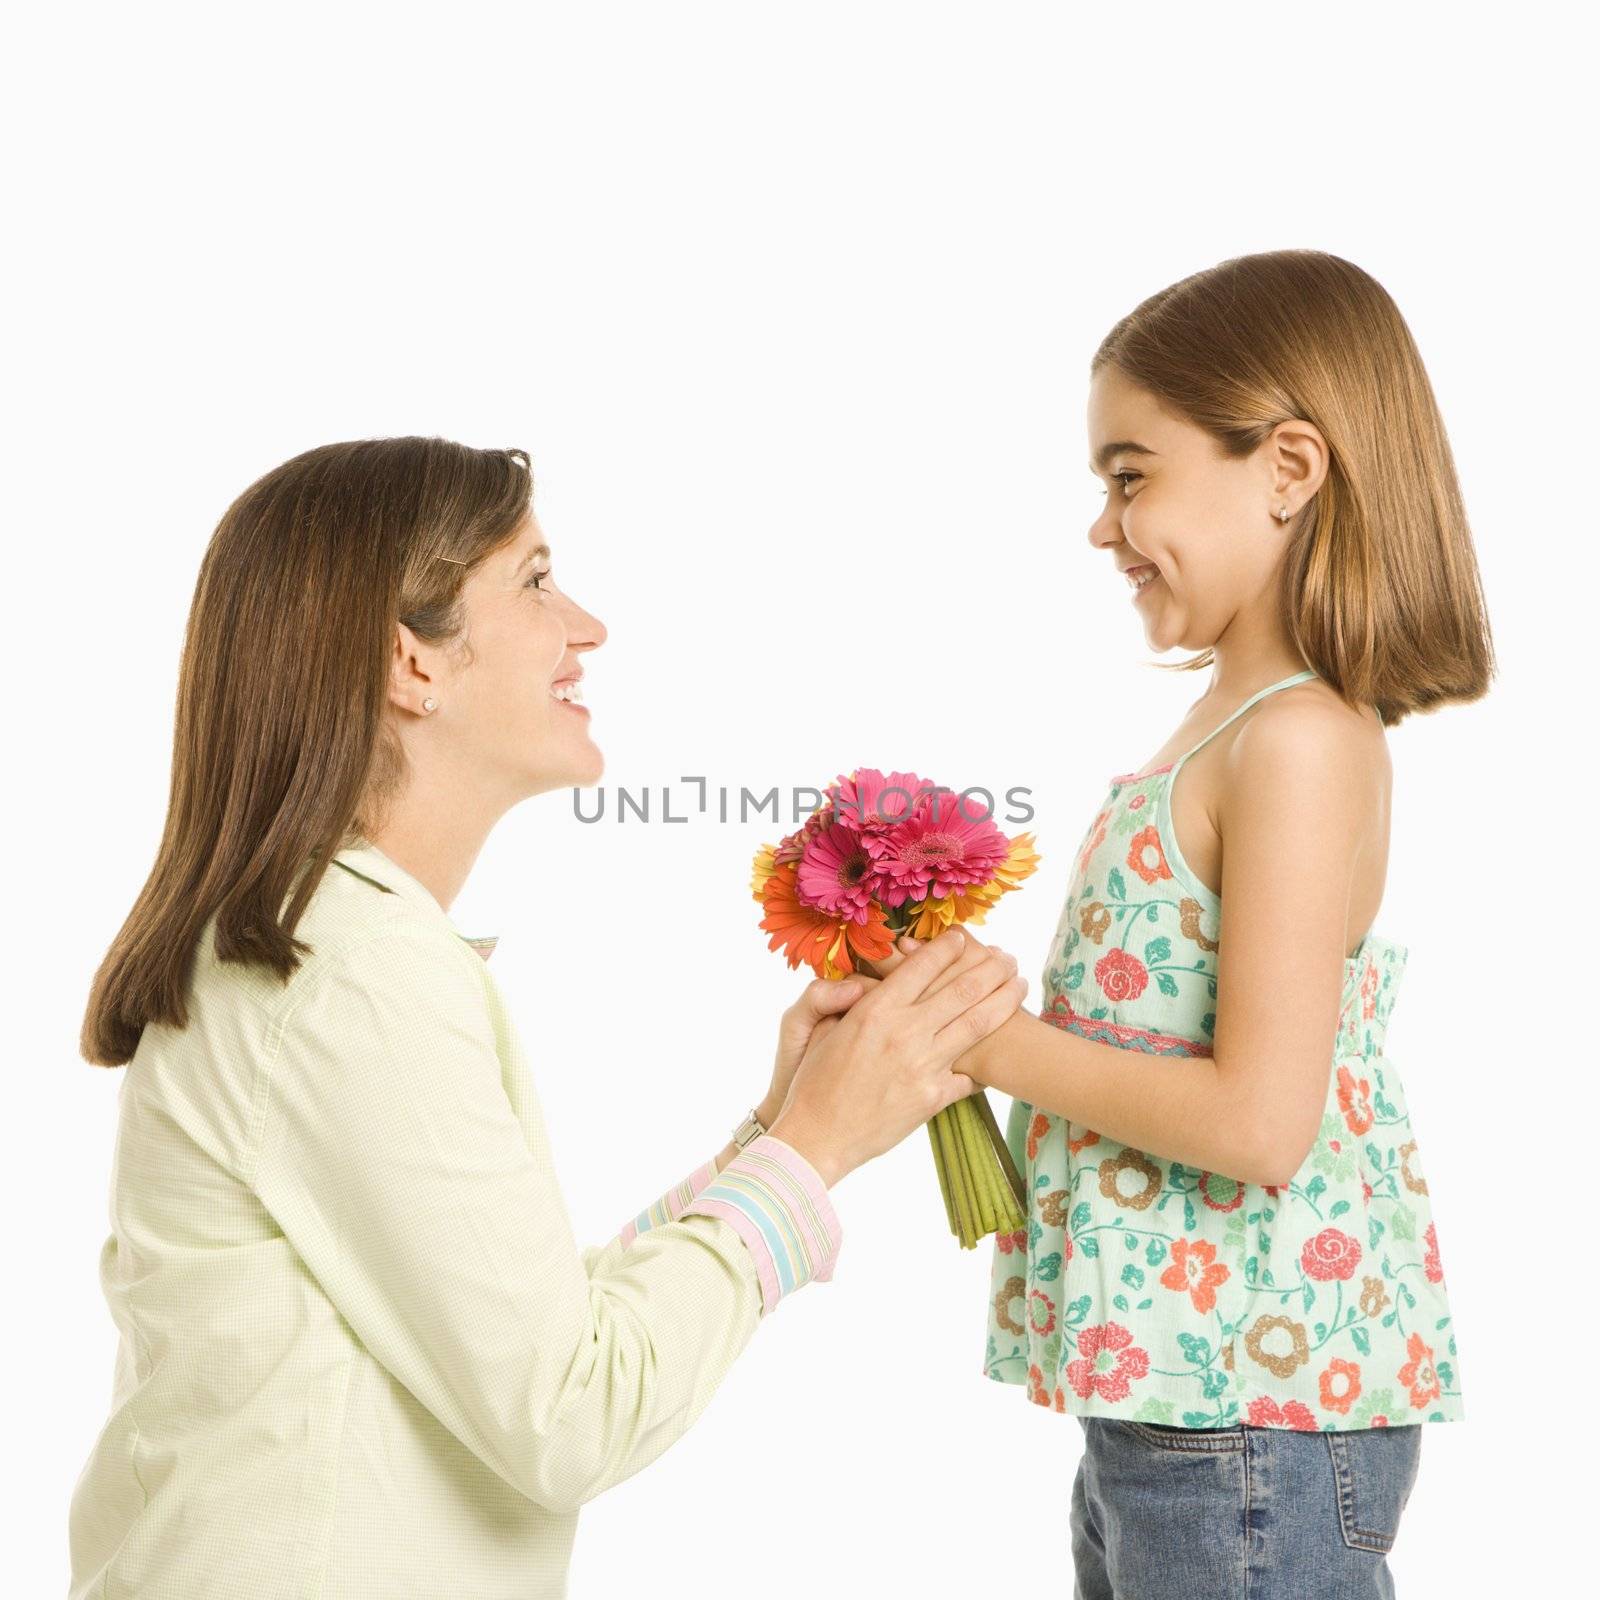 Daughter giving mother flowers. by iofoto